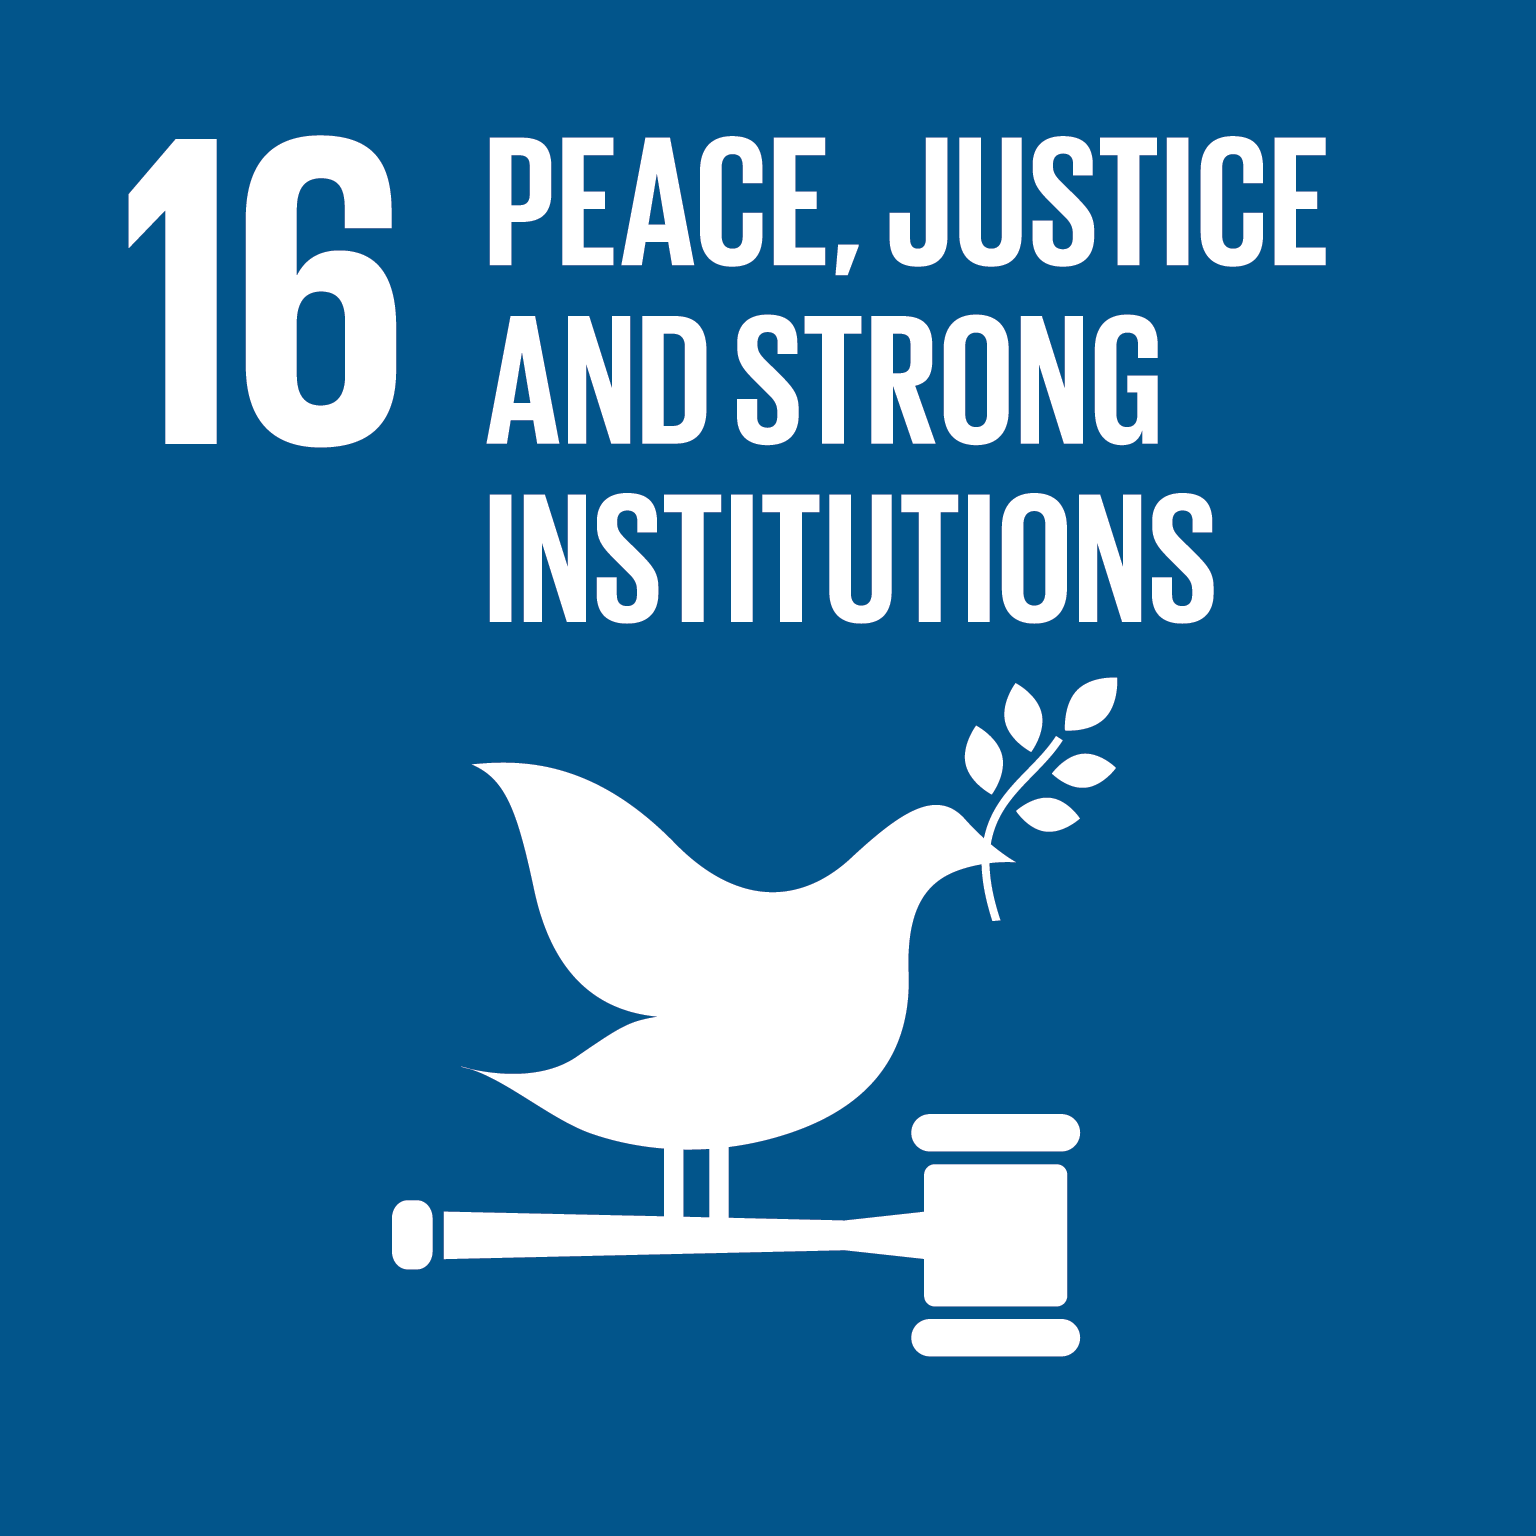 16: Peace, justice and strong institutions